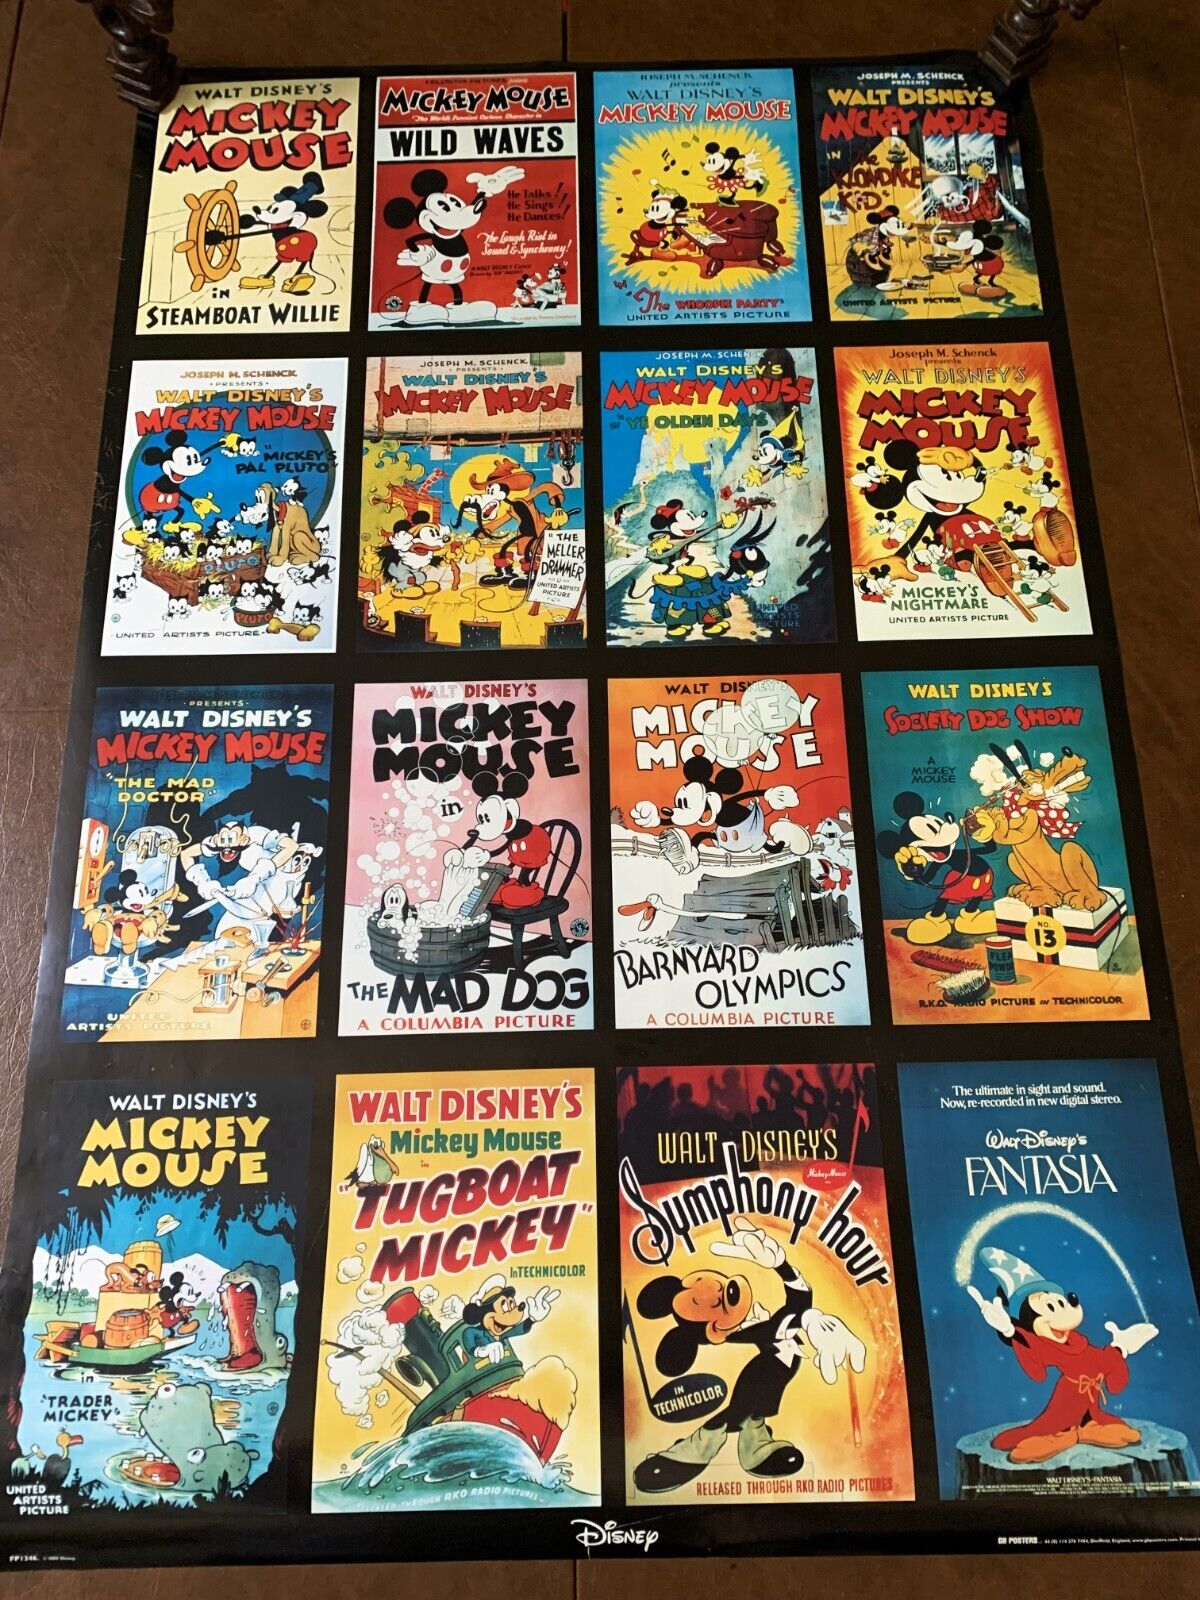 RARE UNUSED Vintage 2005 Mickey Mouse Poster 24x36 Thru The Years Cartoons